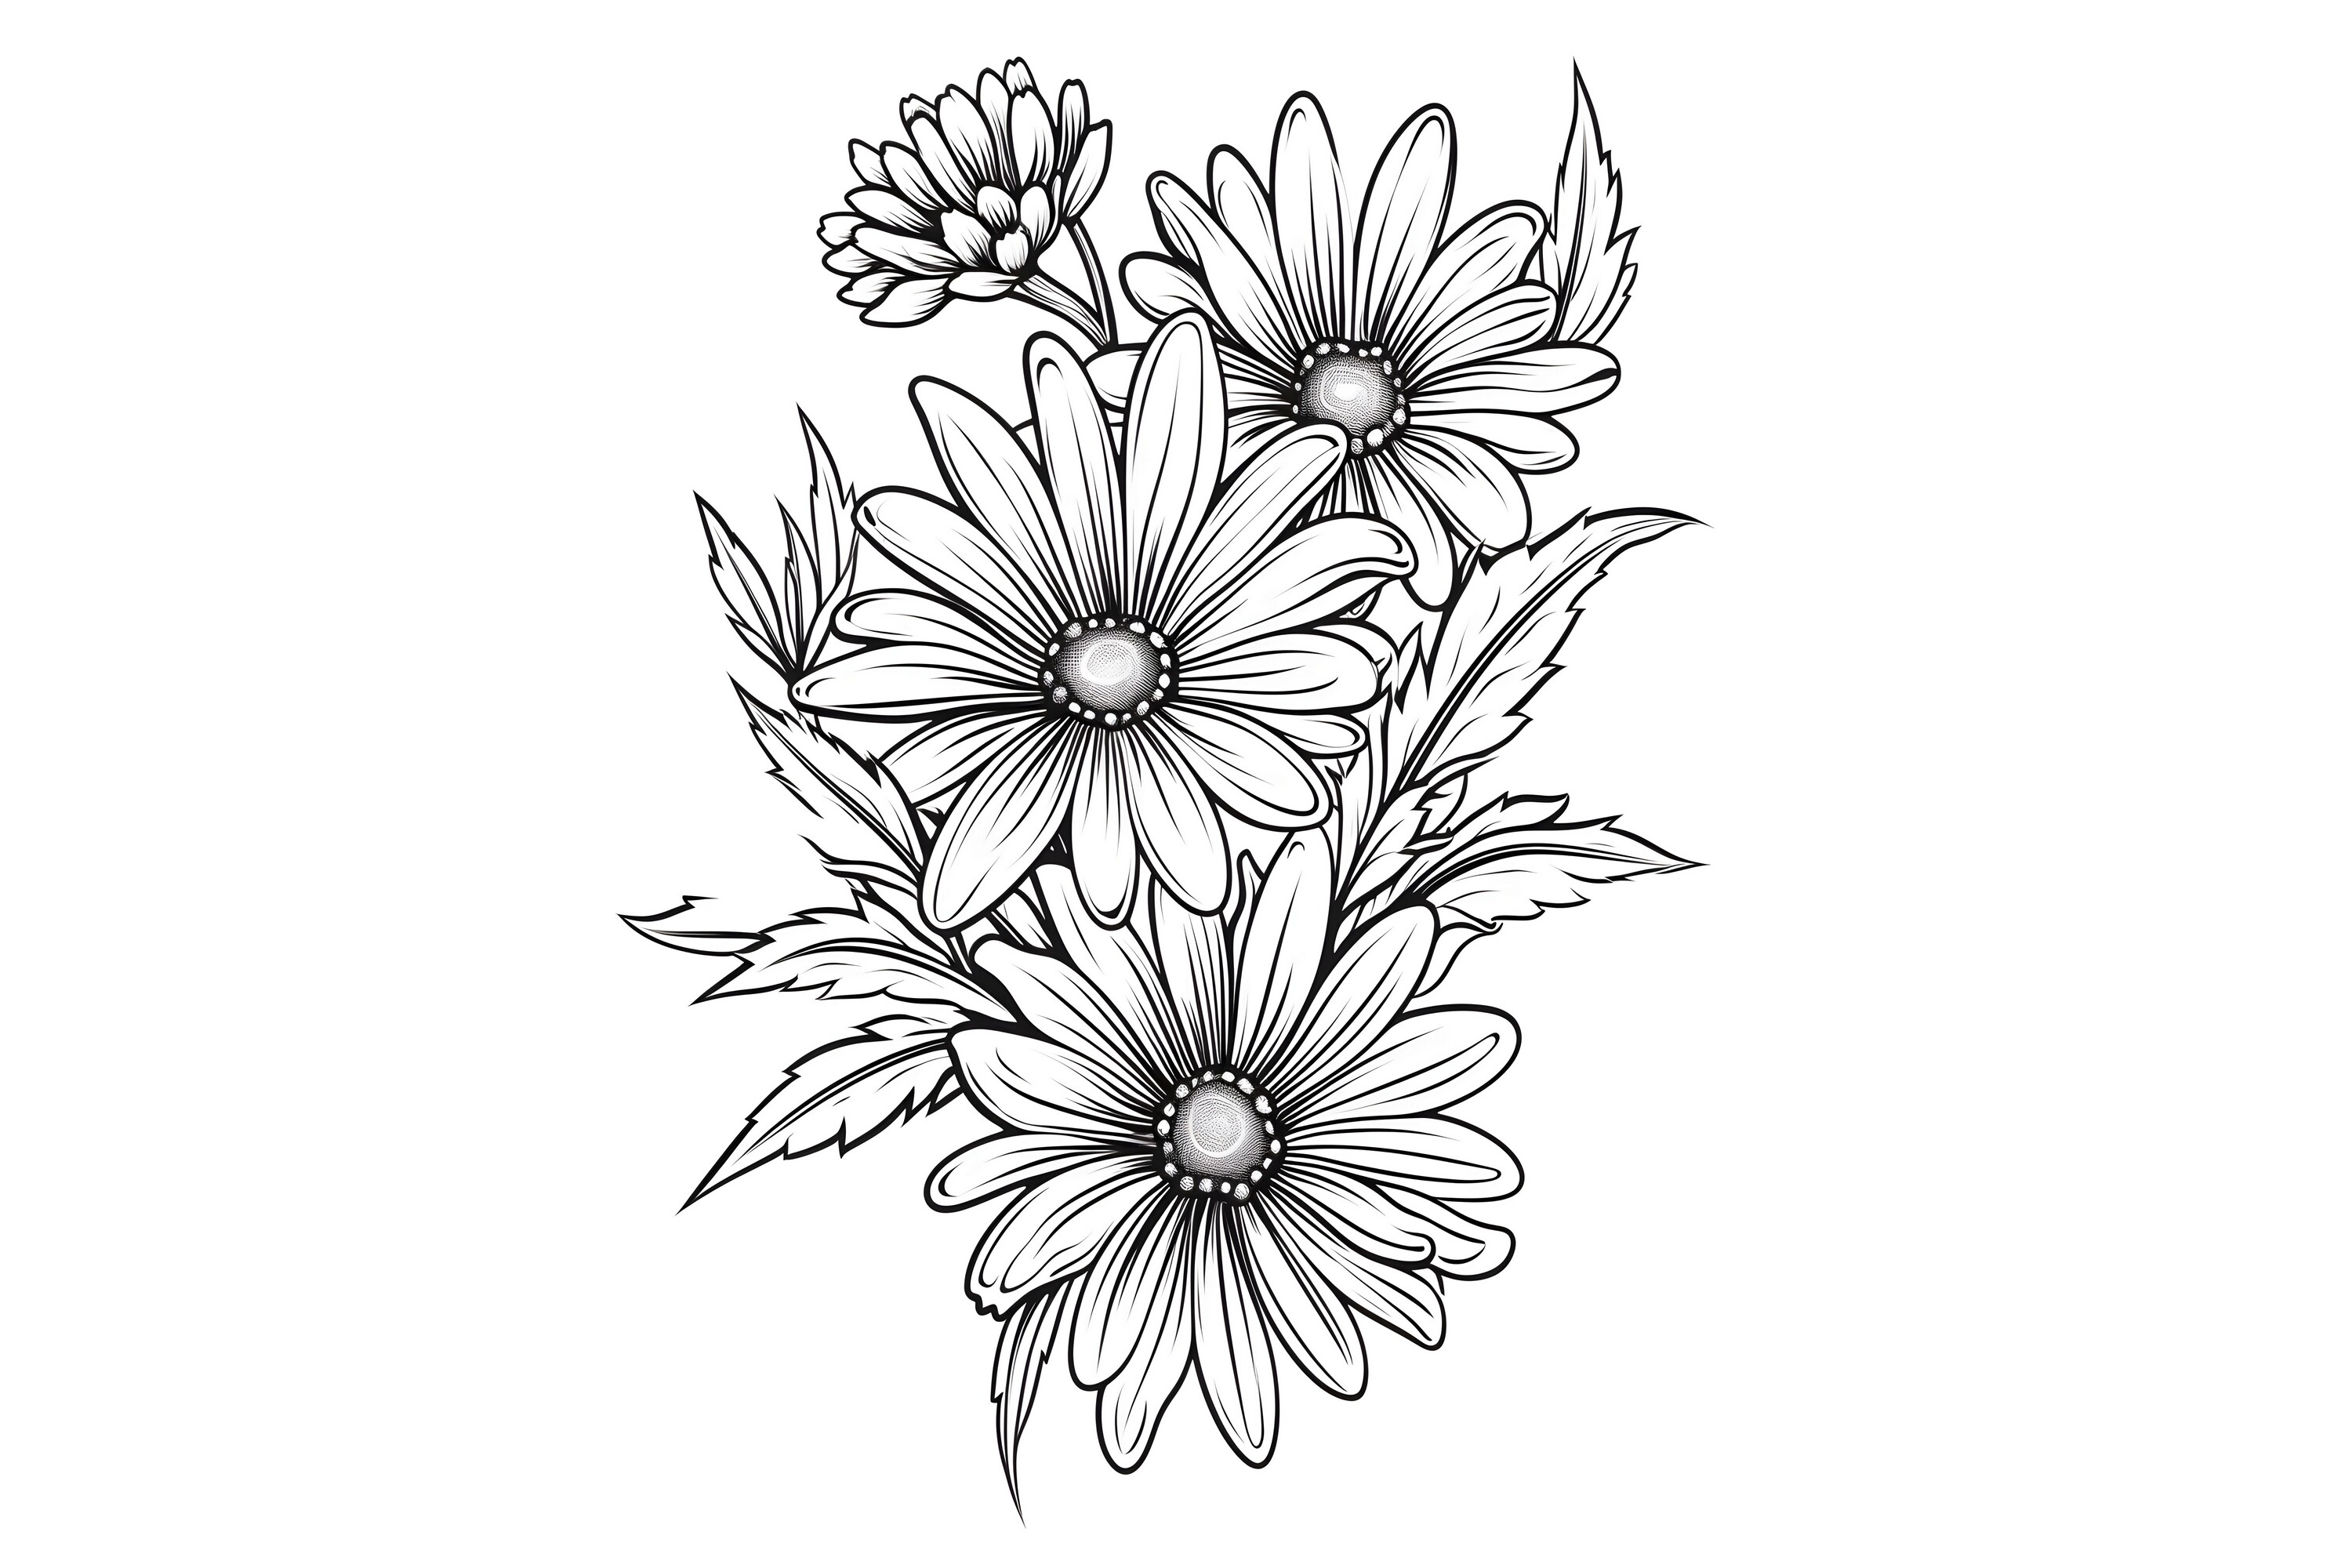 Floral Coloring Page Graphic by Craftable · Creative Fabrica